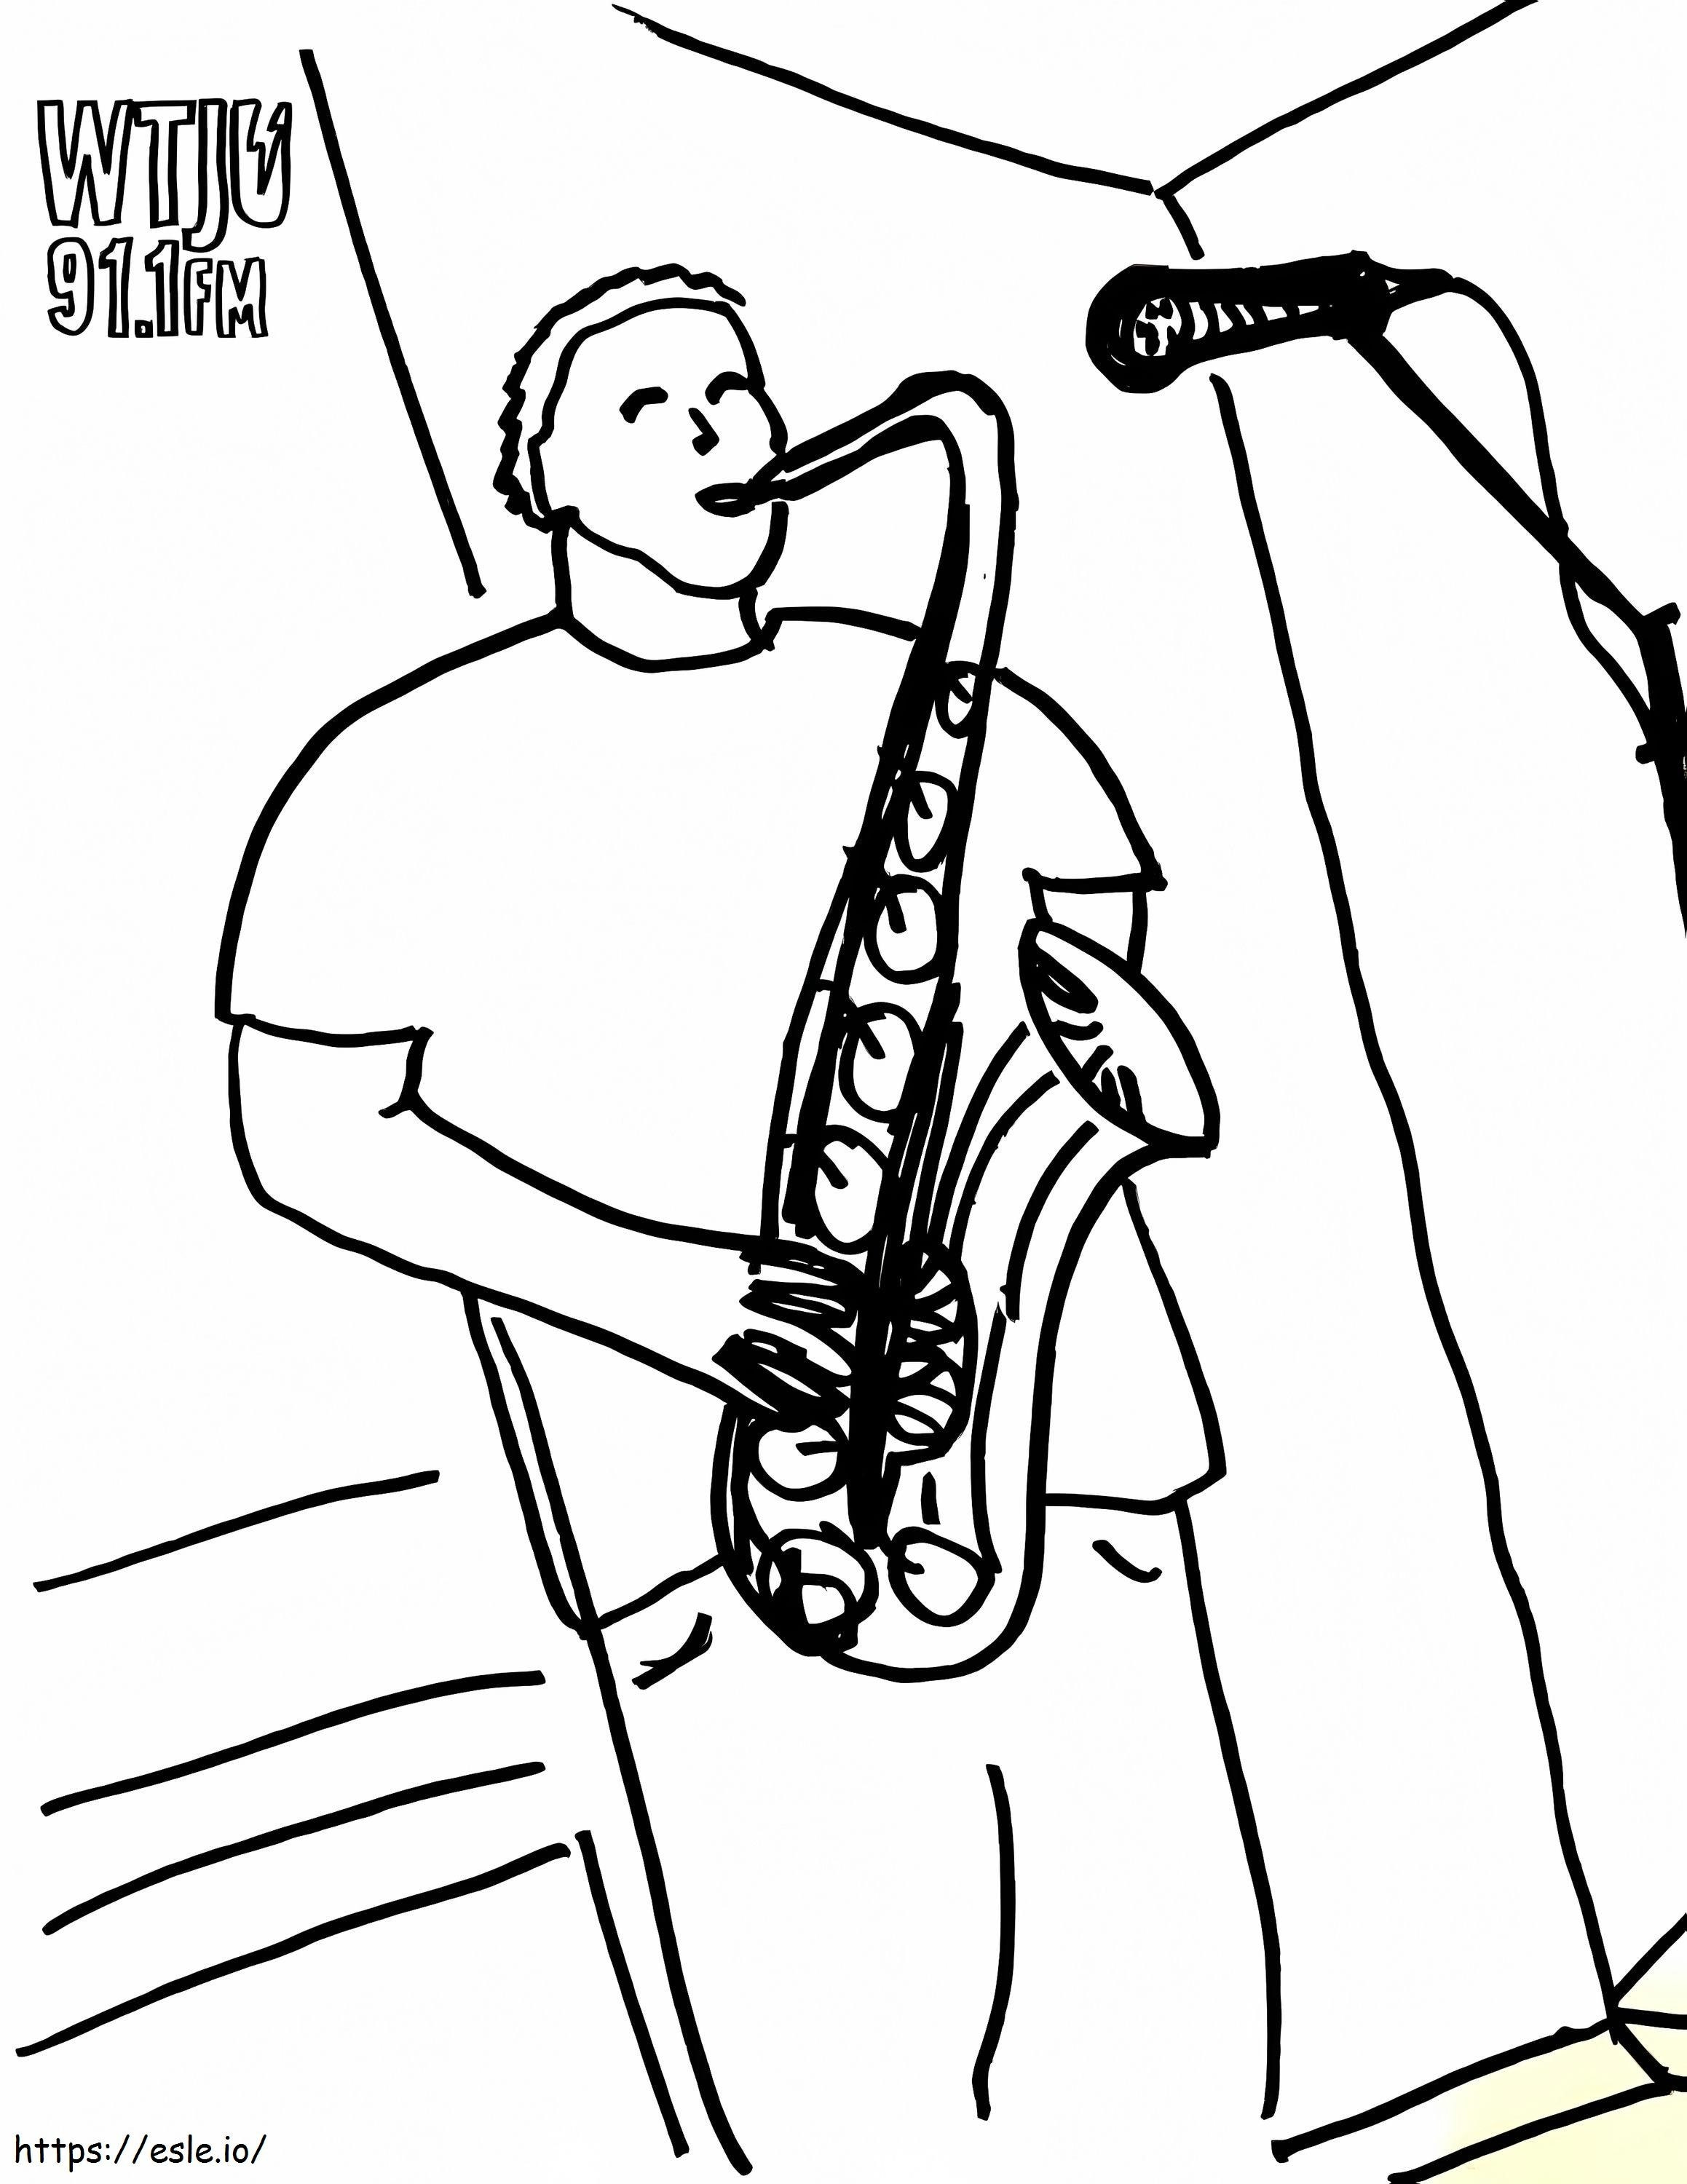 Saxophonist Boy coloring page